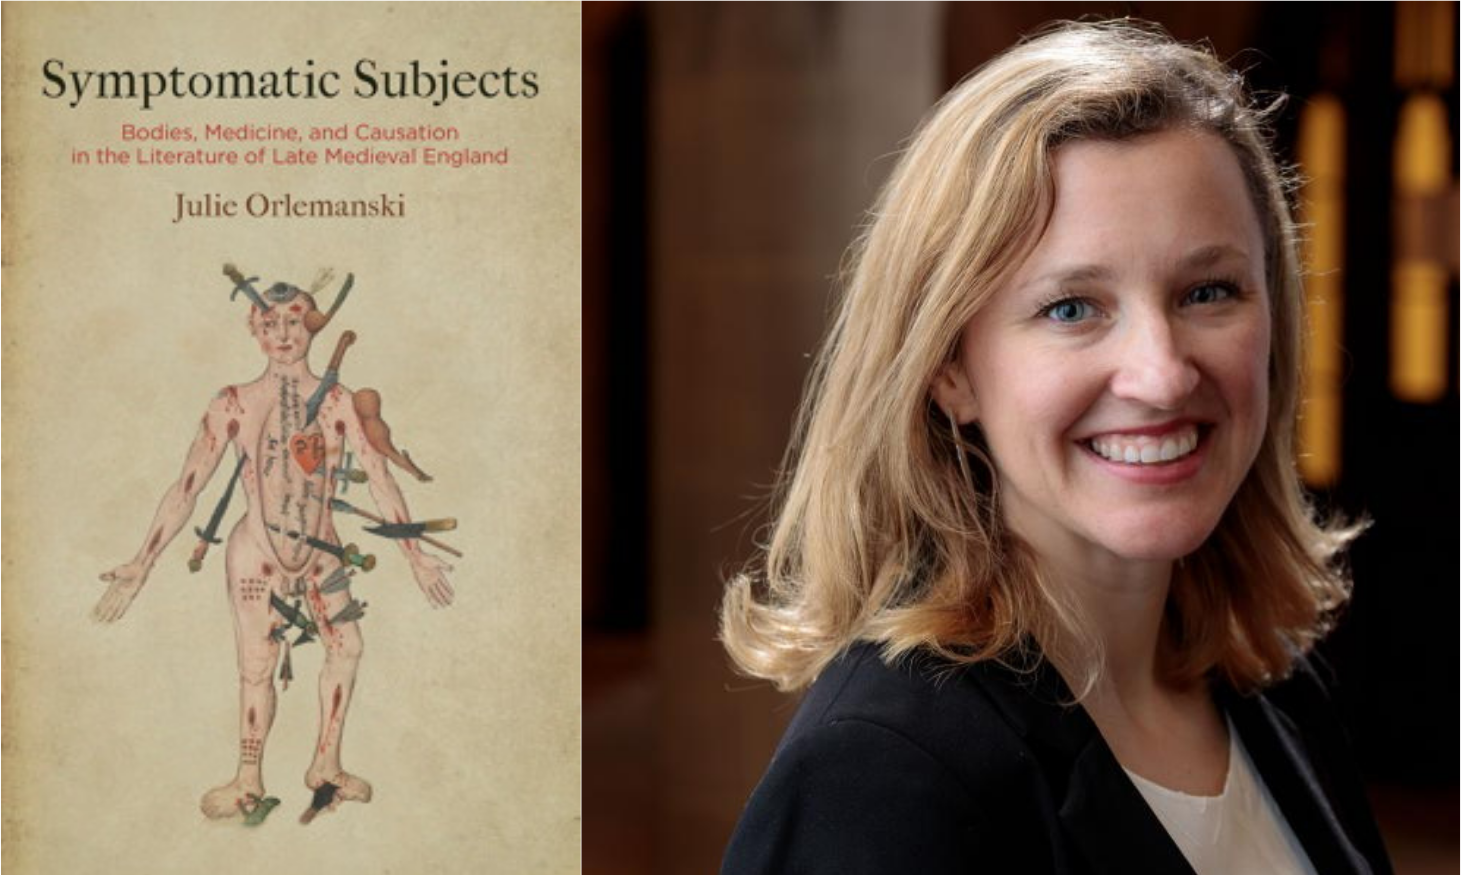 The cover of Orlemanski's book features the Wound Man on a parchment-like background. Orlemanski is featured in an author headshot: a white woman with blonde shoulder length hair wearing a black blazer and white shell. She is smiling.